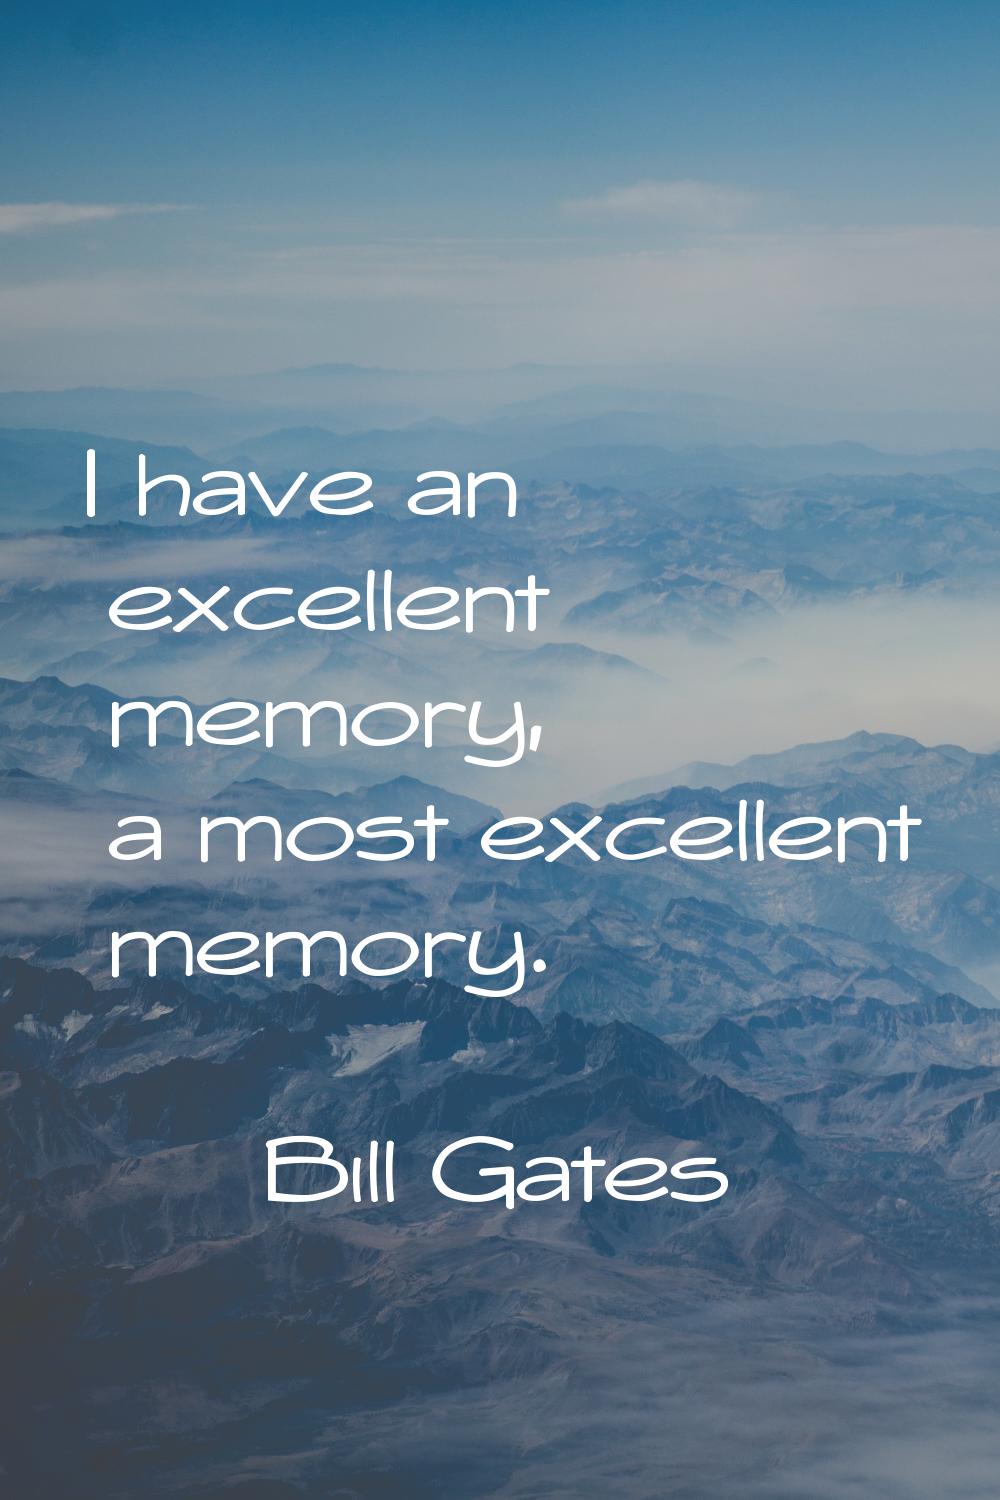 I have an excellent memory, a most excellent memory.